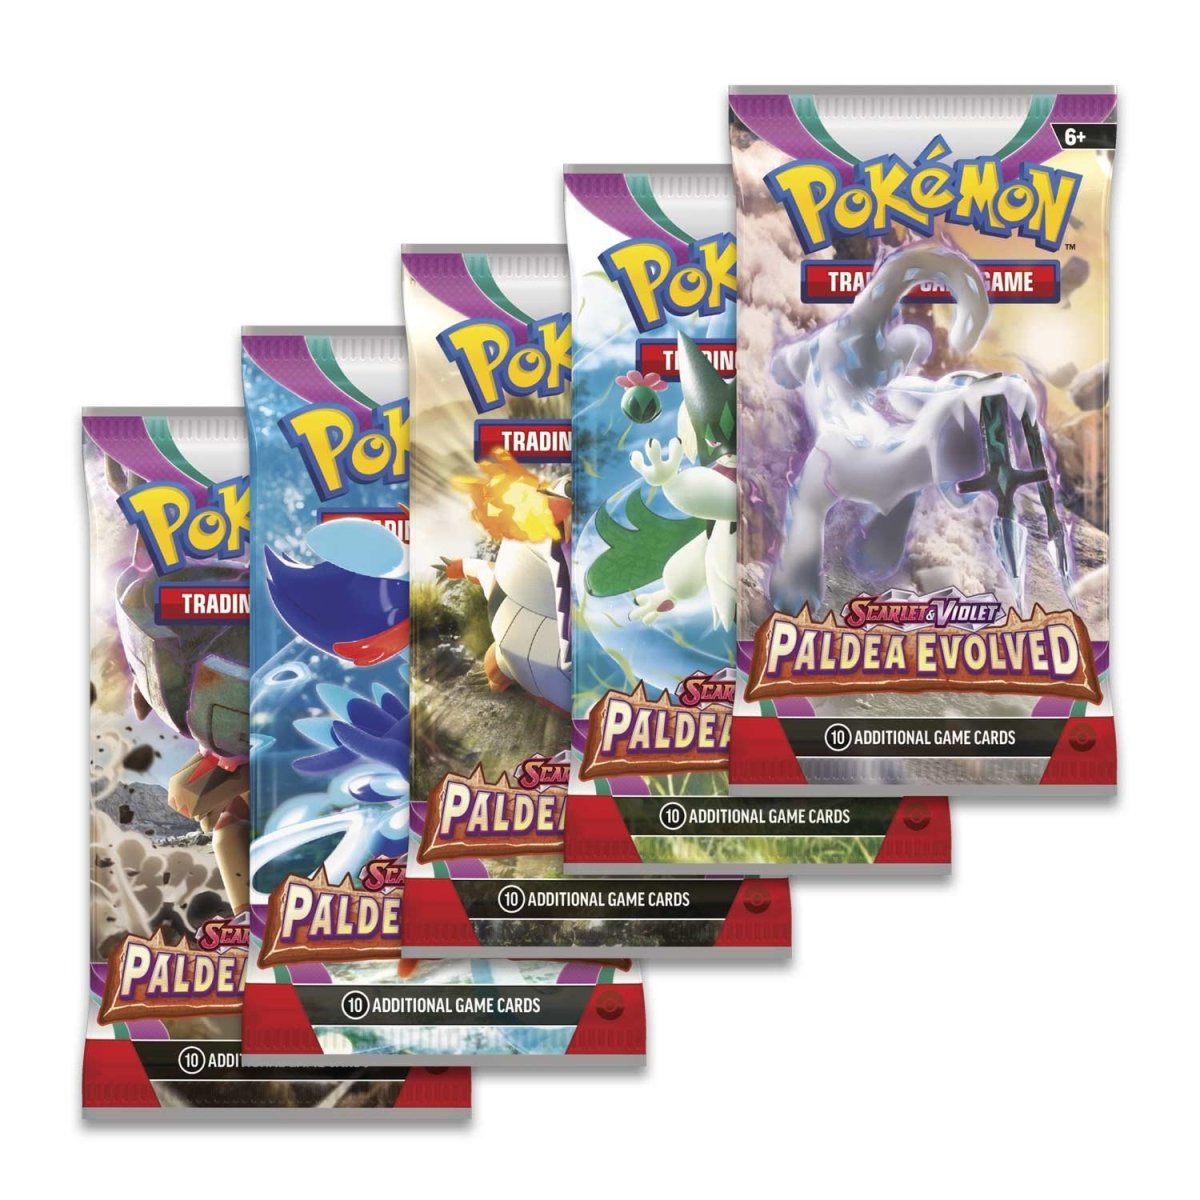 
                  
                    A Pokémon TCG: Scarlet & Violet—Paldea Evolved Booster Display Box from Generation Strange, containing 36 booster packs. Each pack promises a variety of 10 cards, including evolved forms of popular Pokémon and exciting newcomers.
                  
                